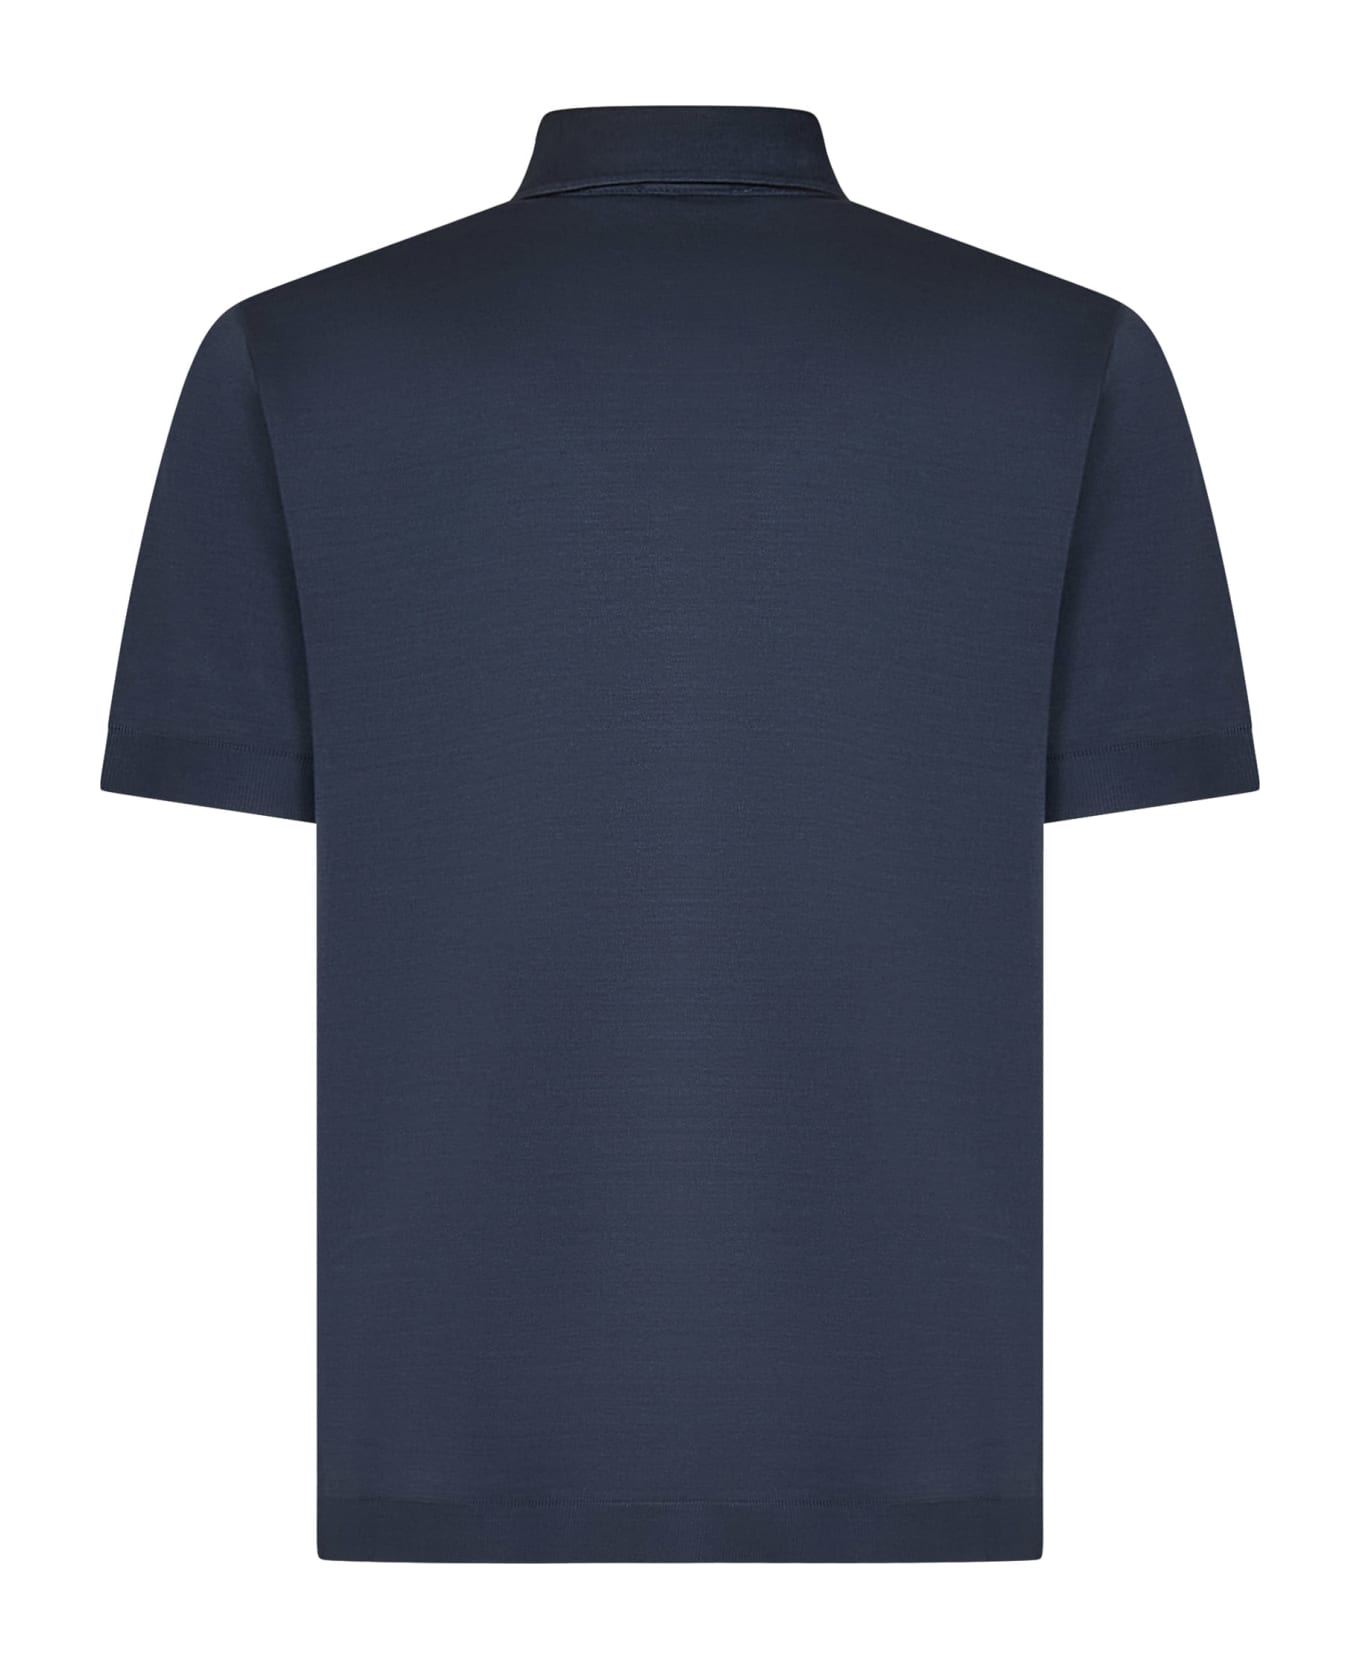 Herno Polo Shirt - Blue ポロシャツ